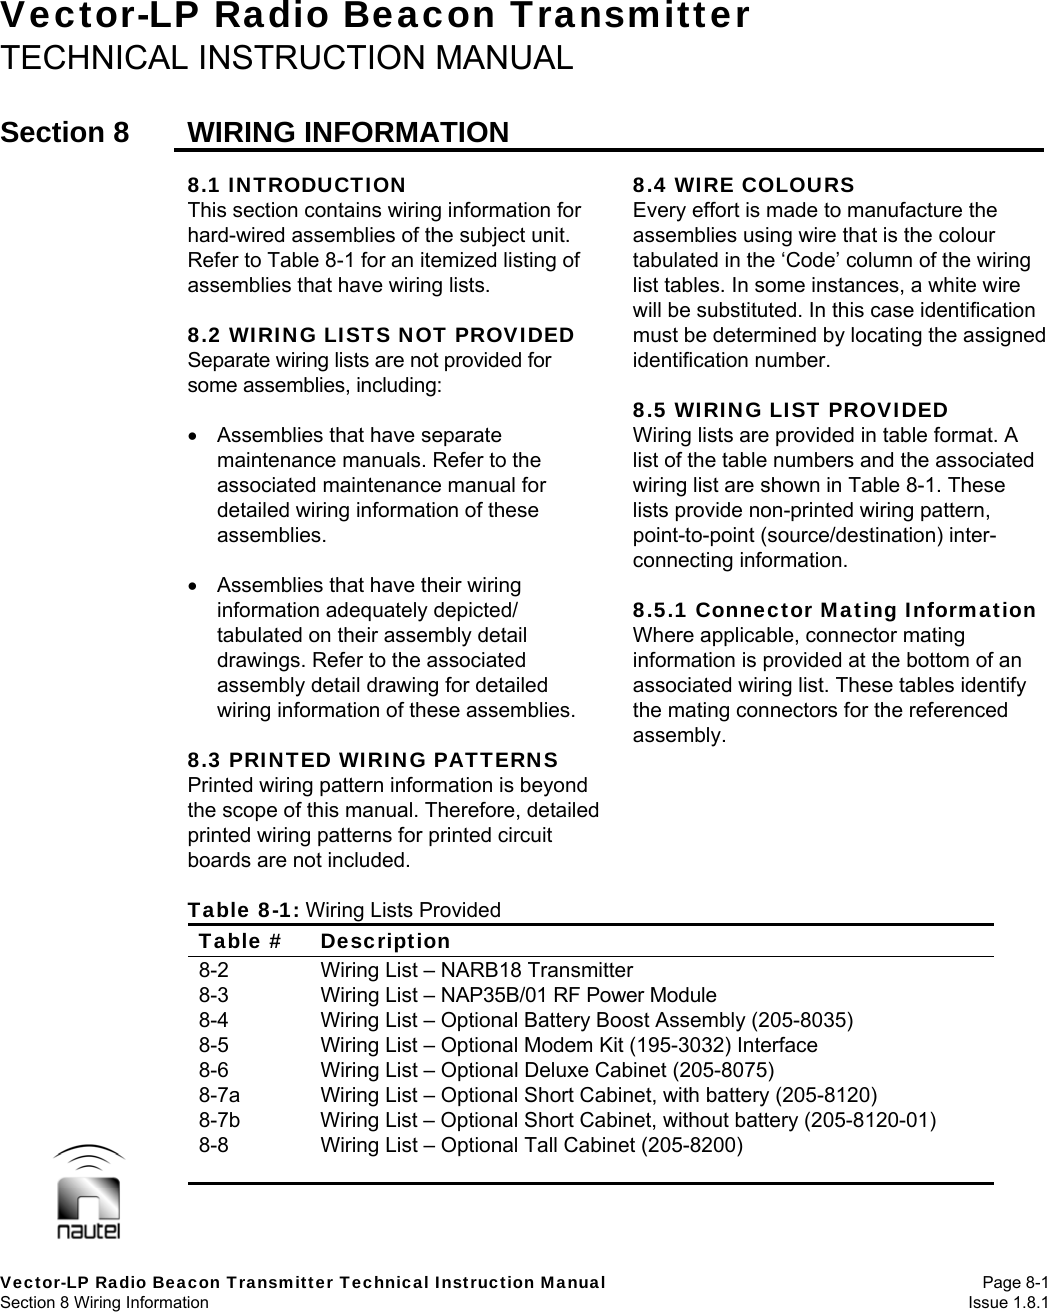  Vector-LP Radio Beacon Transmitter Technical Instruction Manual Page 8-1 Section 8 Wiring Information  Issue 1.8.1  Vector-LP Radio Beacon Transmitter TECHNICAL INSTRUCTION MANUAL  Section 8  WIRING INFORMATION  8.1 INTRODUCTION This section contains wiring information for hard-wired assemblies of the subject unit. Refer to Table 8-1 for an itemized listing of assemblies that have wiring lists.  8.2 WIRING LISTS NOT PROVIDED Separate wiring lists are not provided for some assemblies, including:    Assemblies that have separate maintenance manuals. Refer to the associated maintenance manual for detailed wiring information of these assemblies.    Assemblies that have their wiring information adequately depicted/ tabulated on their assembly detail drawings. Refer to the associated assembly detail drawing for detailed wiring information of these assemblies.  8.3 PRINTED WIRING PATTERNS Printed wiring pattern information is beyond the scope of this manual. Therefore, detailed printed wiring patterns for printed circuit boards are not included. 8.4 WIRE COLOURS Every effort is made to manufacture the assemblies using wire that is the colour tabulated in the ‘Code’ column of the wiring list tables. In some instances, a white wire will be substituted. In this case identification must be determined by locating the assigned identification number.  8.5 WIRING LIST PROVIDED Wiring lists are provided in table format. A list of the table numbers and the associated wiring list are shown in Table 8-1. These lists provide non-printed wiring pattern, point-to-point (source/destination) inter-connecting information.  8.5.1 Connector Mating Information Where applicable, connector mating information is provided at the bottom of an associated wiring list. These tables identify the mating connectors for the referenced assembly.    Table 8-1: Wiring Lists Provided Table #  Description 8-2  Wiring List – NARB18 Transmitter 8-3  Wiring List – NAP35B/01 RF Power Module 8-4  Wiring List – Optional Battery Boost Assembly (205-8035) 8-5  Wiring List – Optional Modem Kit (195-3032) Interface 8-6  Wiring List – Optional Deluxe Cabinet (205-8075) 8-7a  Wiring List – Optional Short Cabinet, with battery (205-8120) 8-7b  Wiring List – Optional Short Cabinet, without battery (205-8120-01) 8-8  Wiring List – Optional Tall Cabinet (205-8200)     